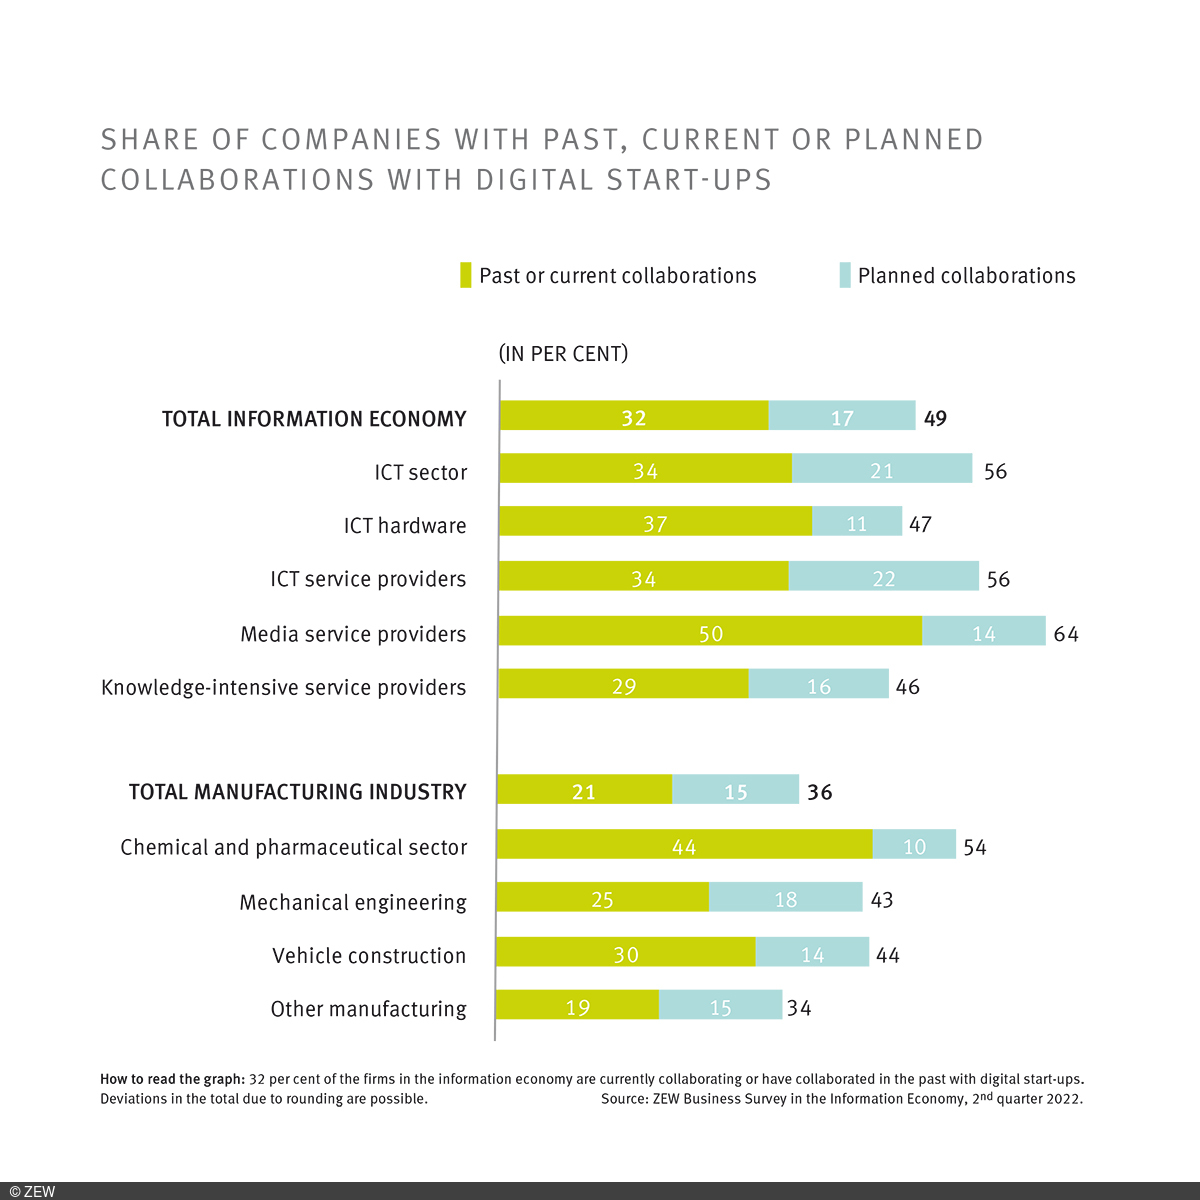 Bar chart: Share of companies with past, current or planned collaborations with digital start-ups